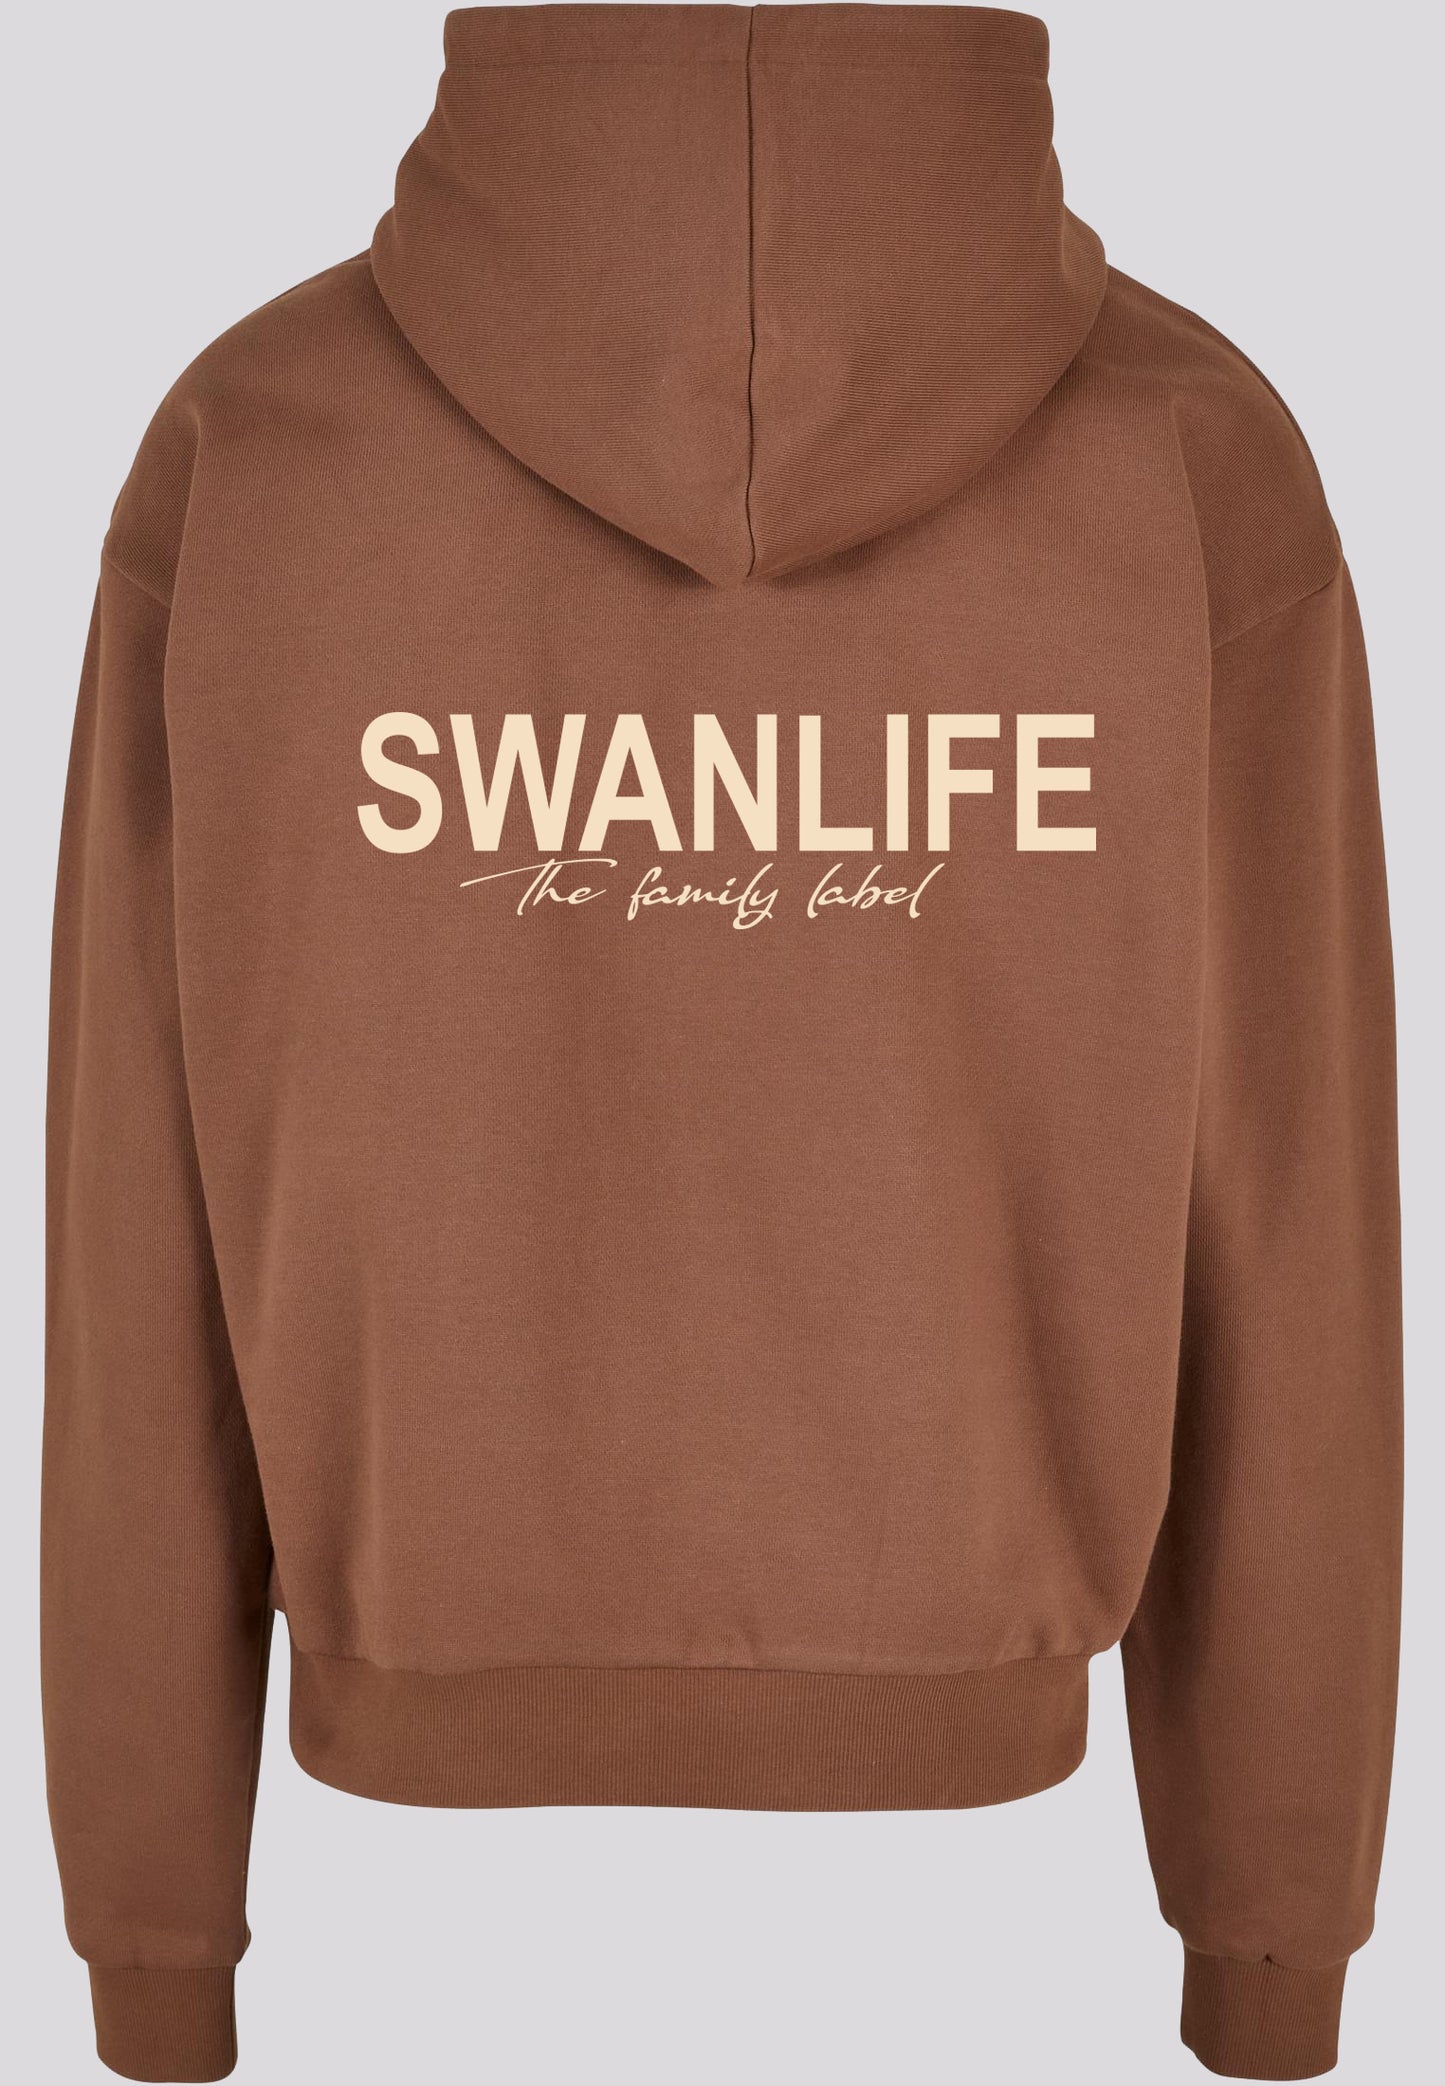 The Family Label Heavy Hoodie Unisex | Brown/Beige - Swanlife Fashion